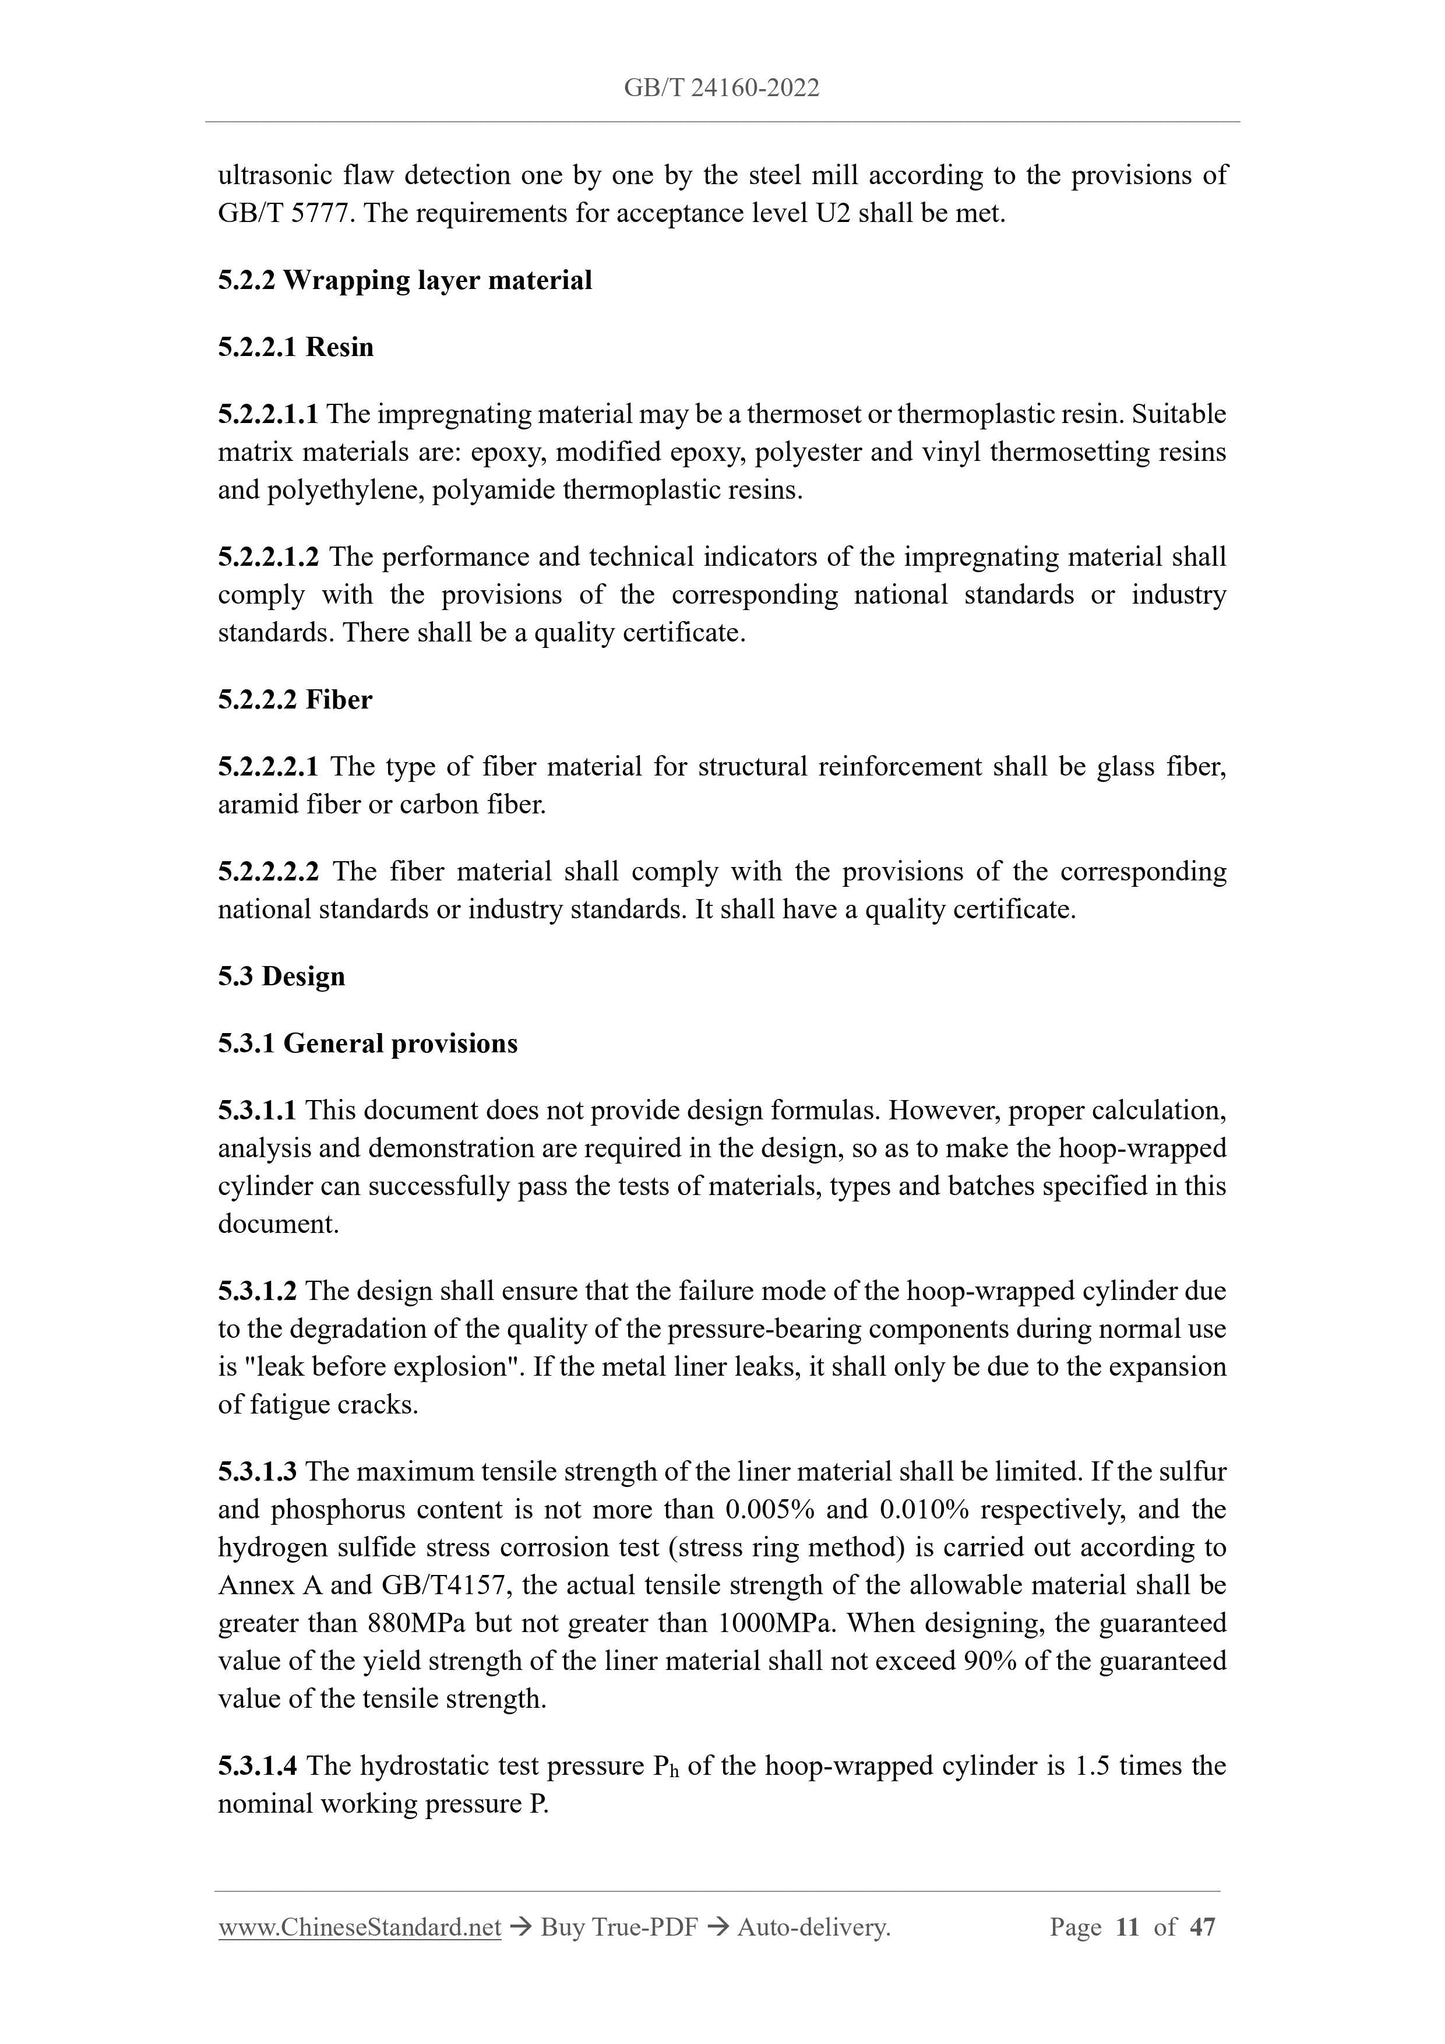 GB/T 24160-2022 Page 5